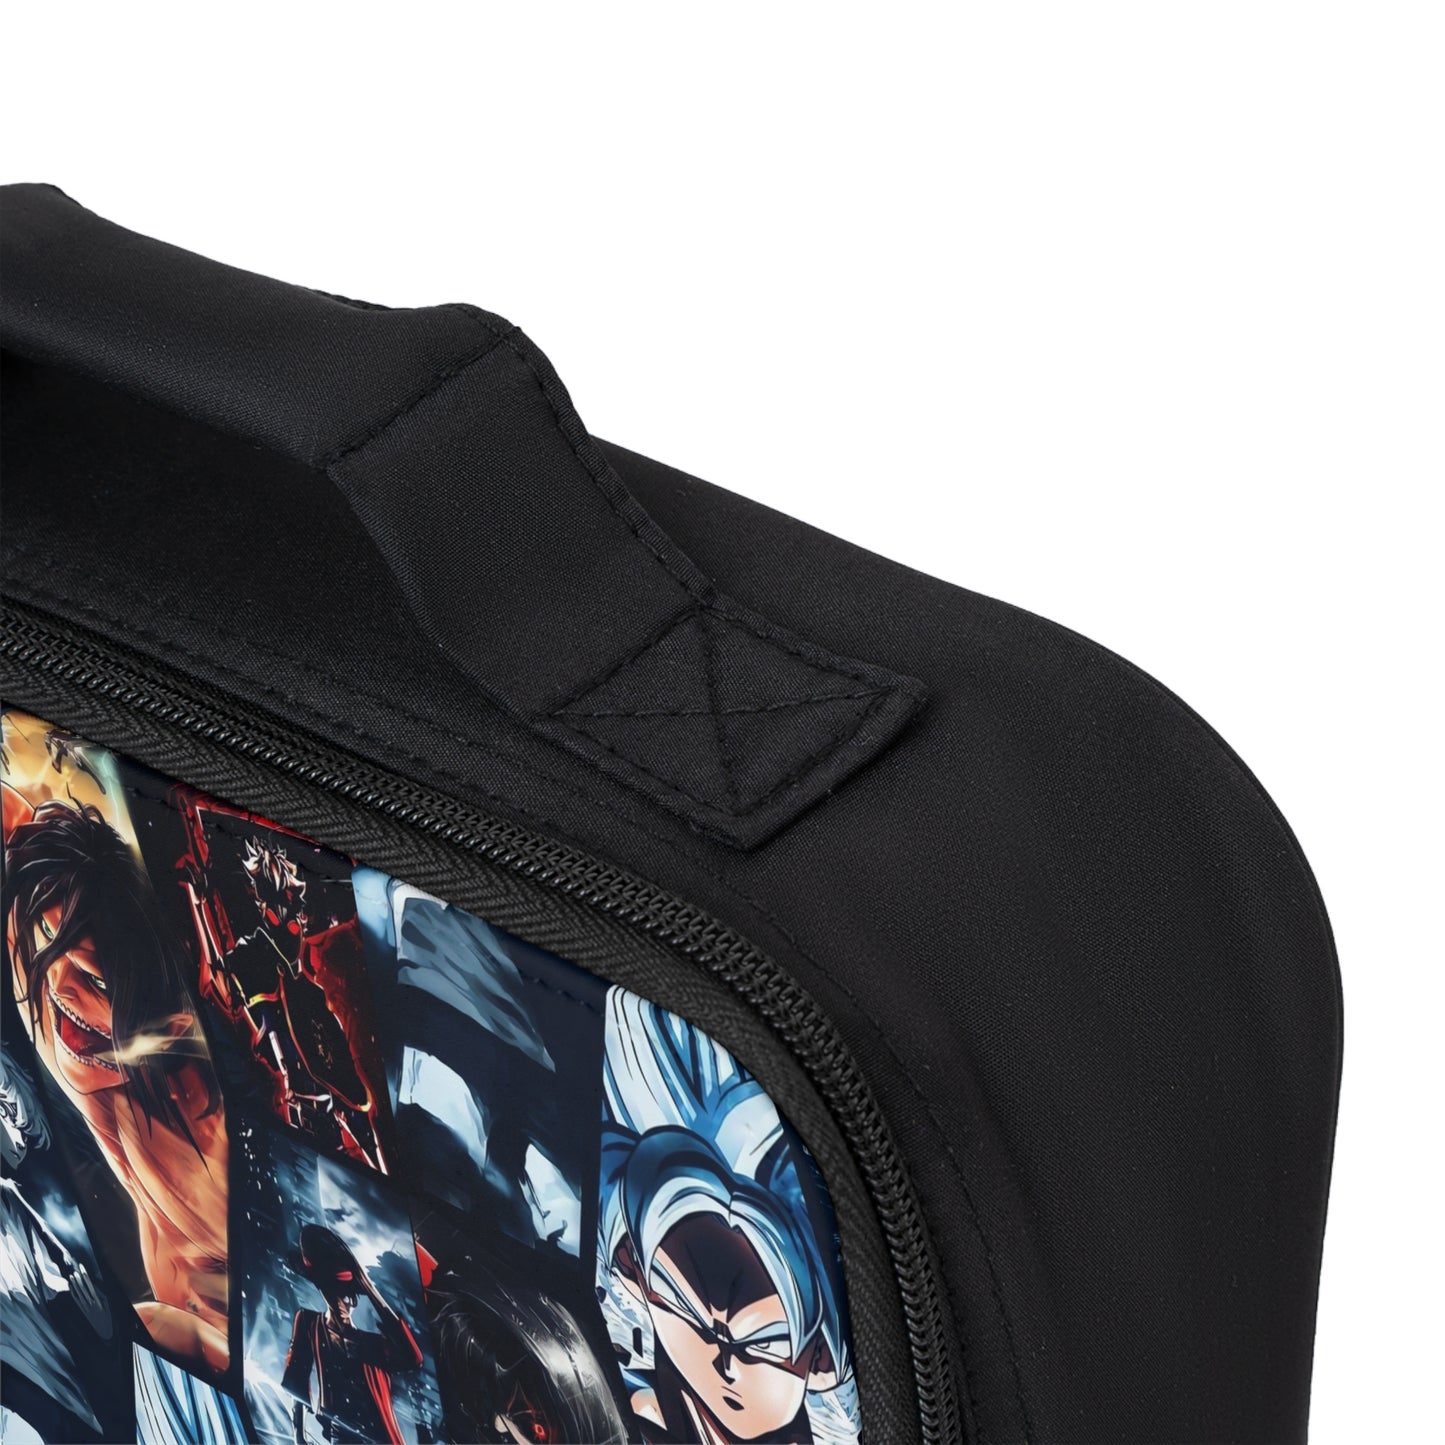 Anime Hero Montage Lunch Bag